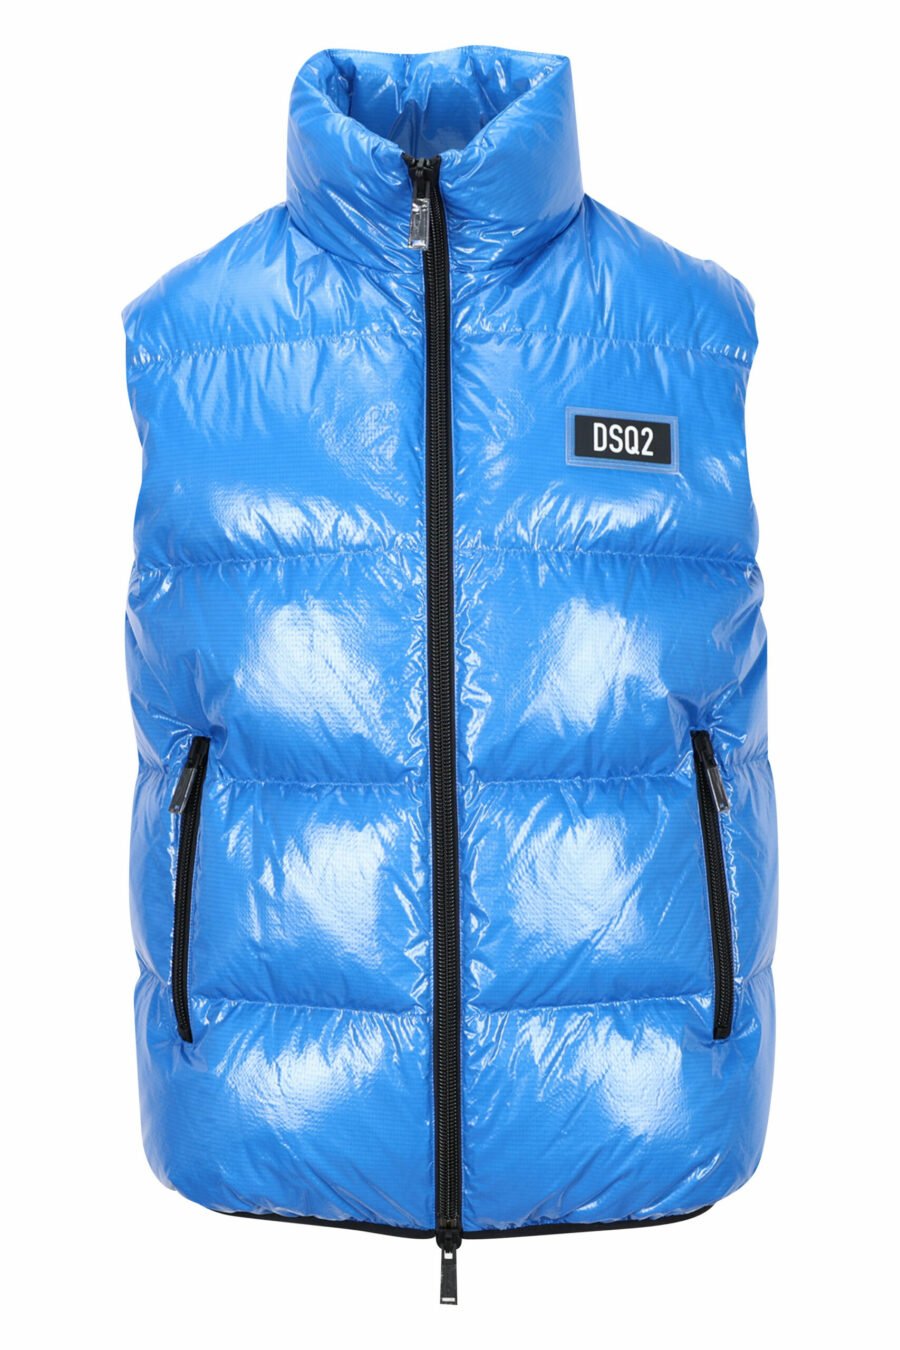 Bright blue puff gilet with mini-logo - 8054148016036 1 scaled